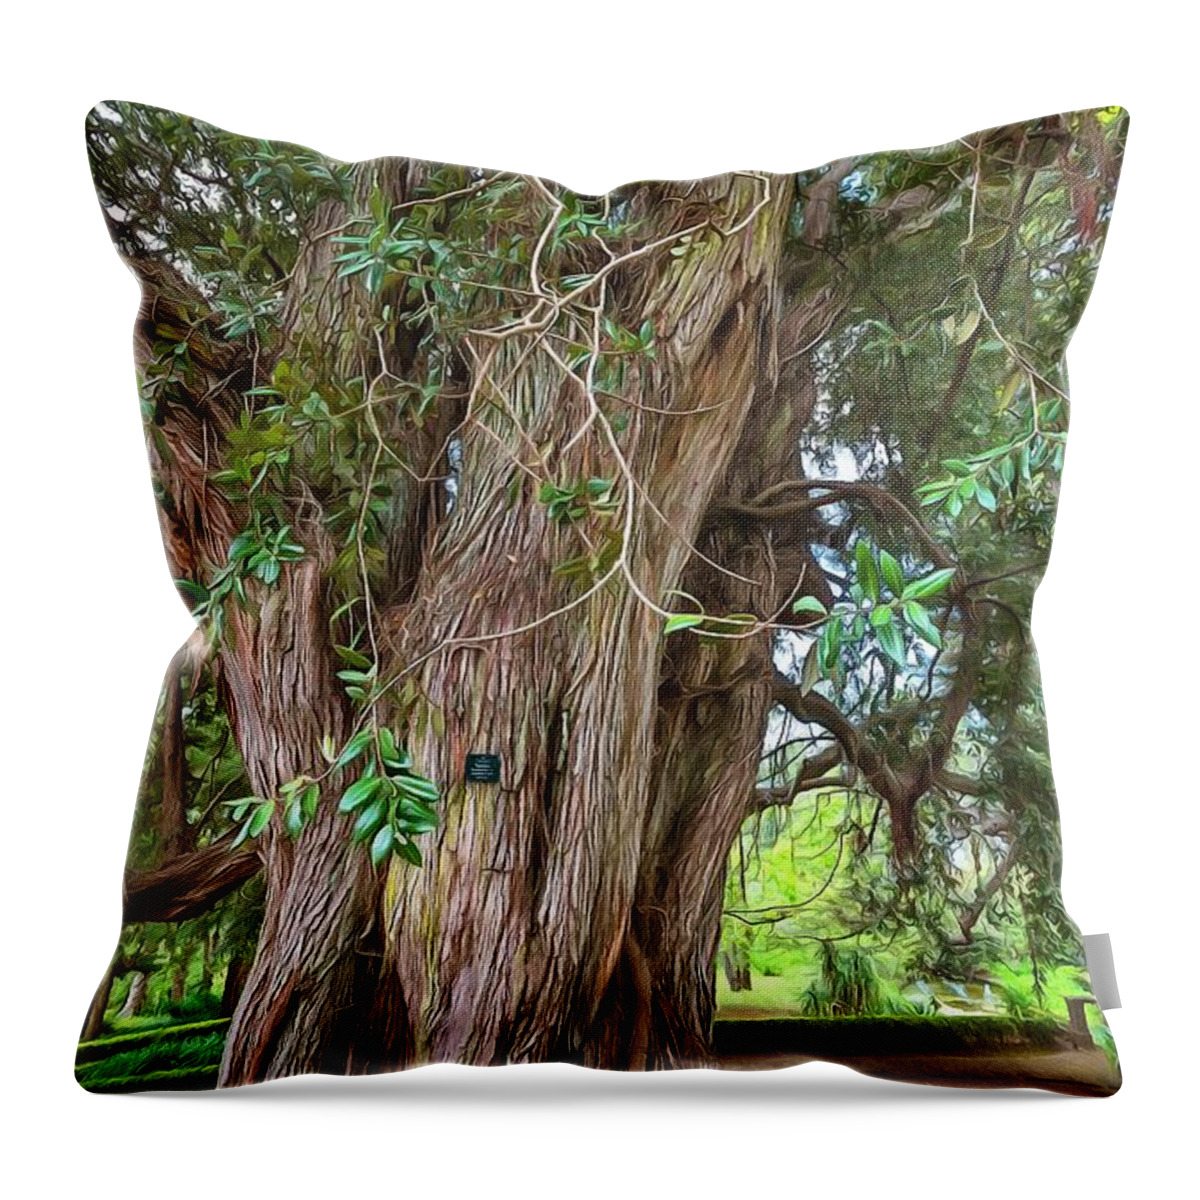 Metrosideros Excelsa Throw Pillow featuring the photograph New Zealand Christmas Tree by Eva Lechner